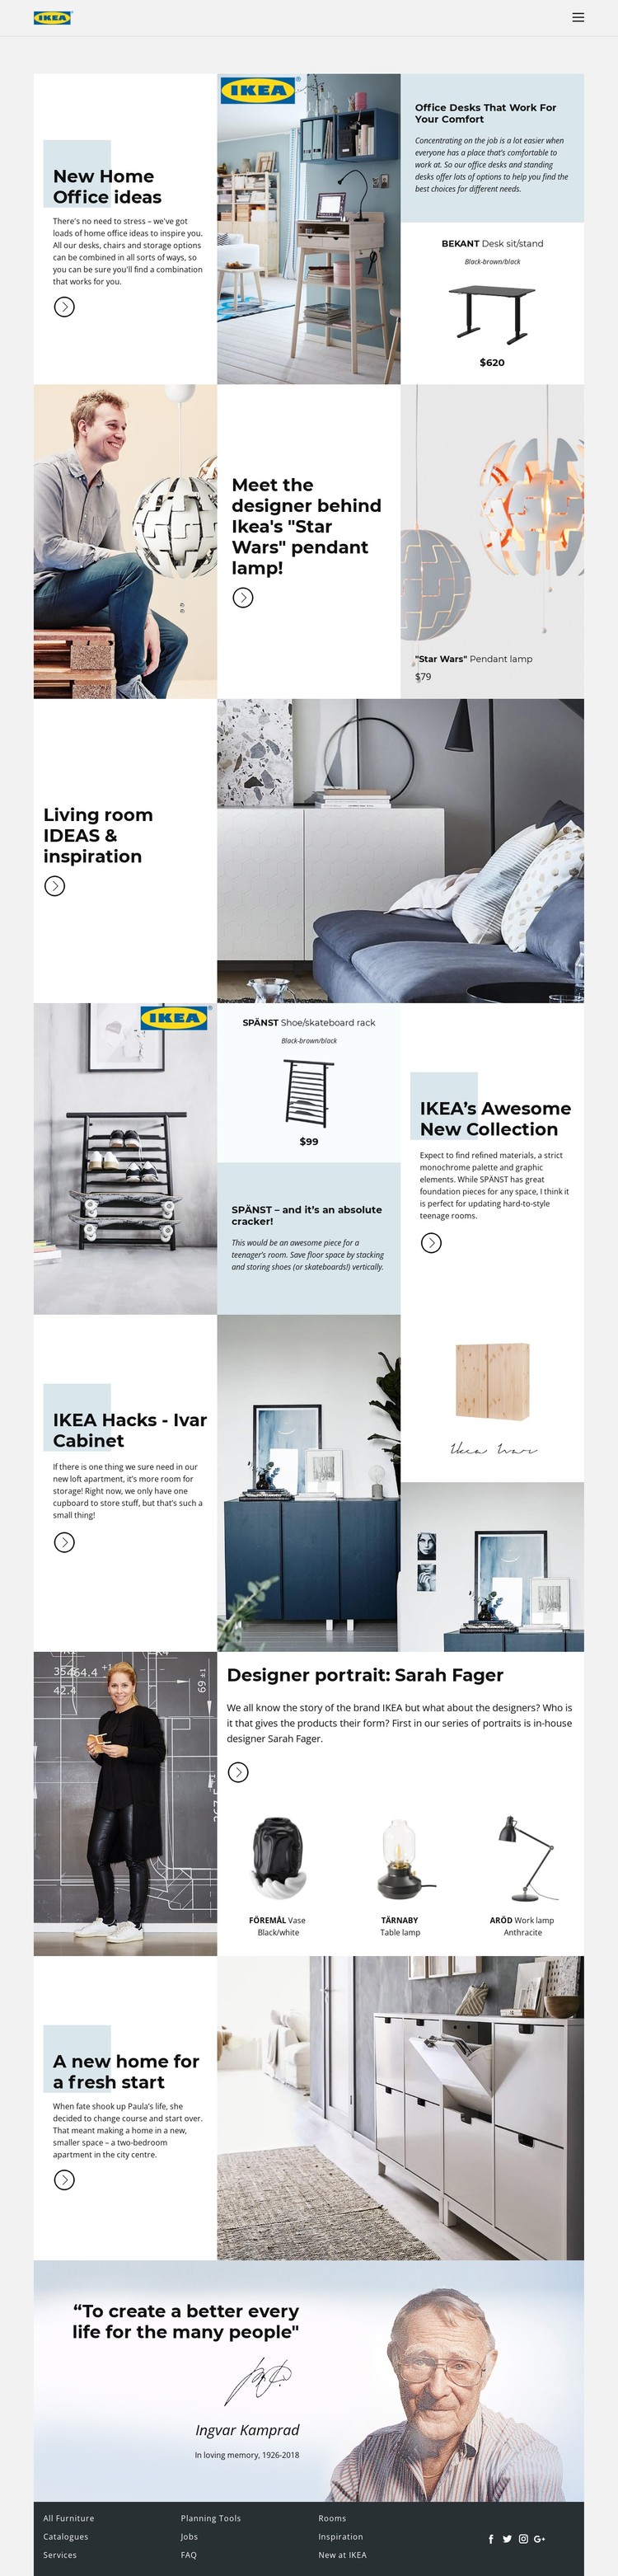 Inspiration from IKEA CSS Template